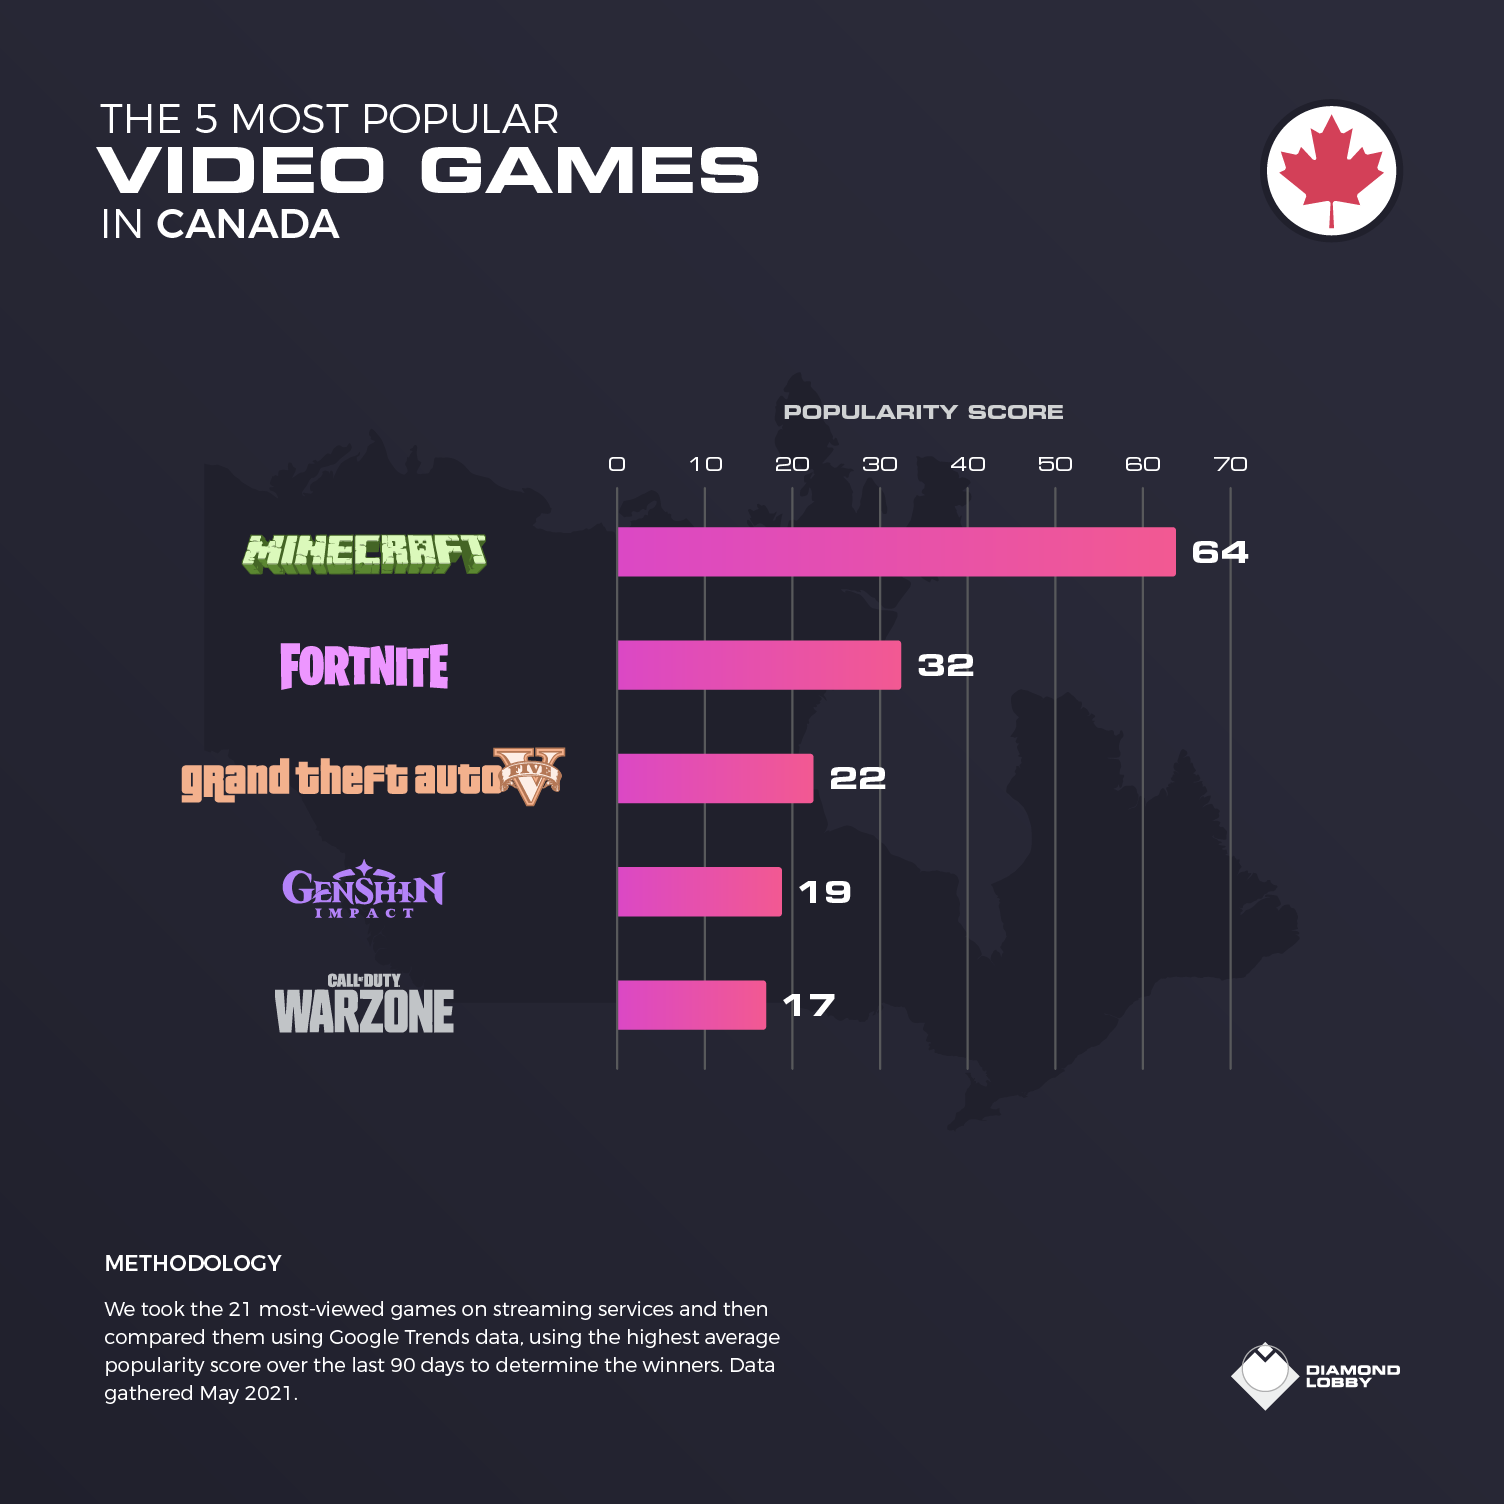 The top 5 video games in Canada